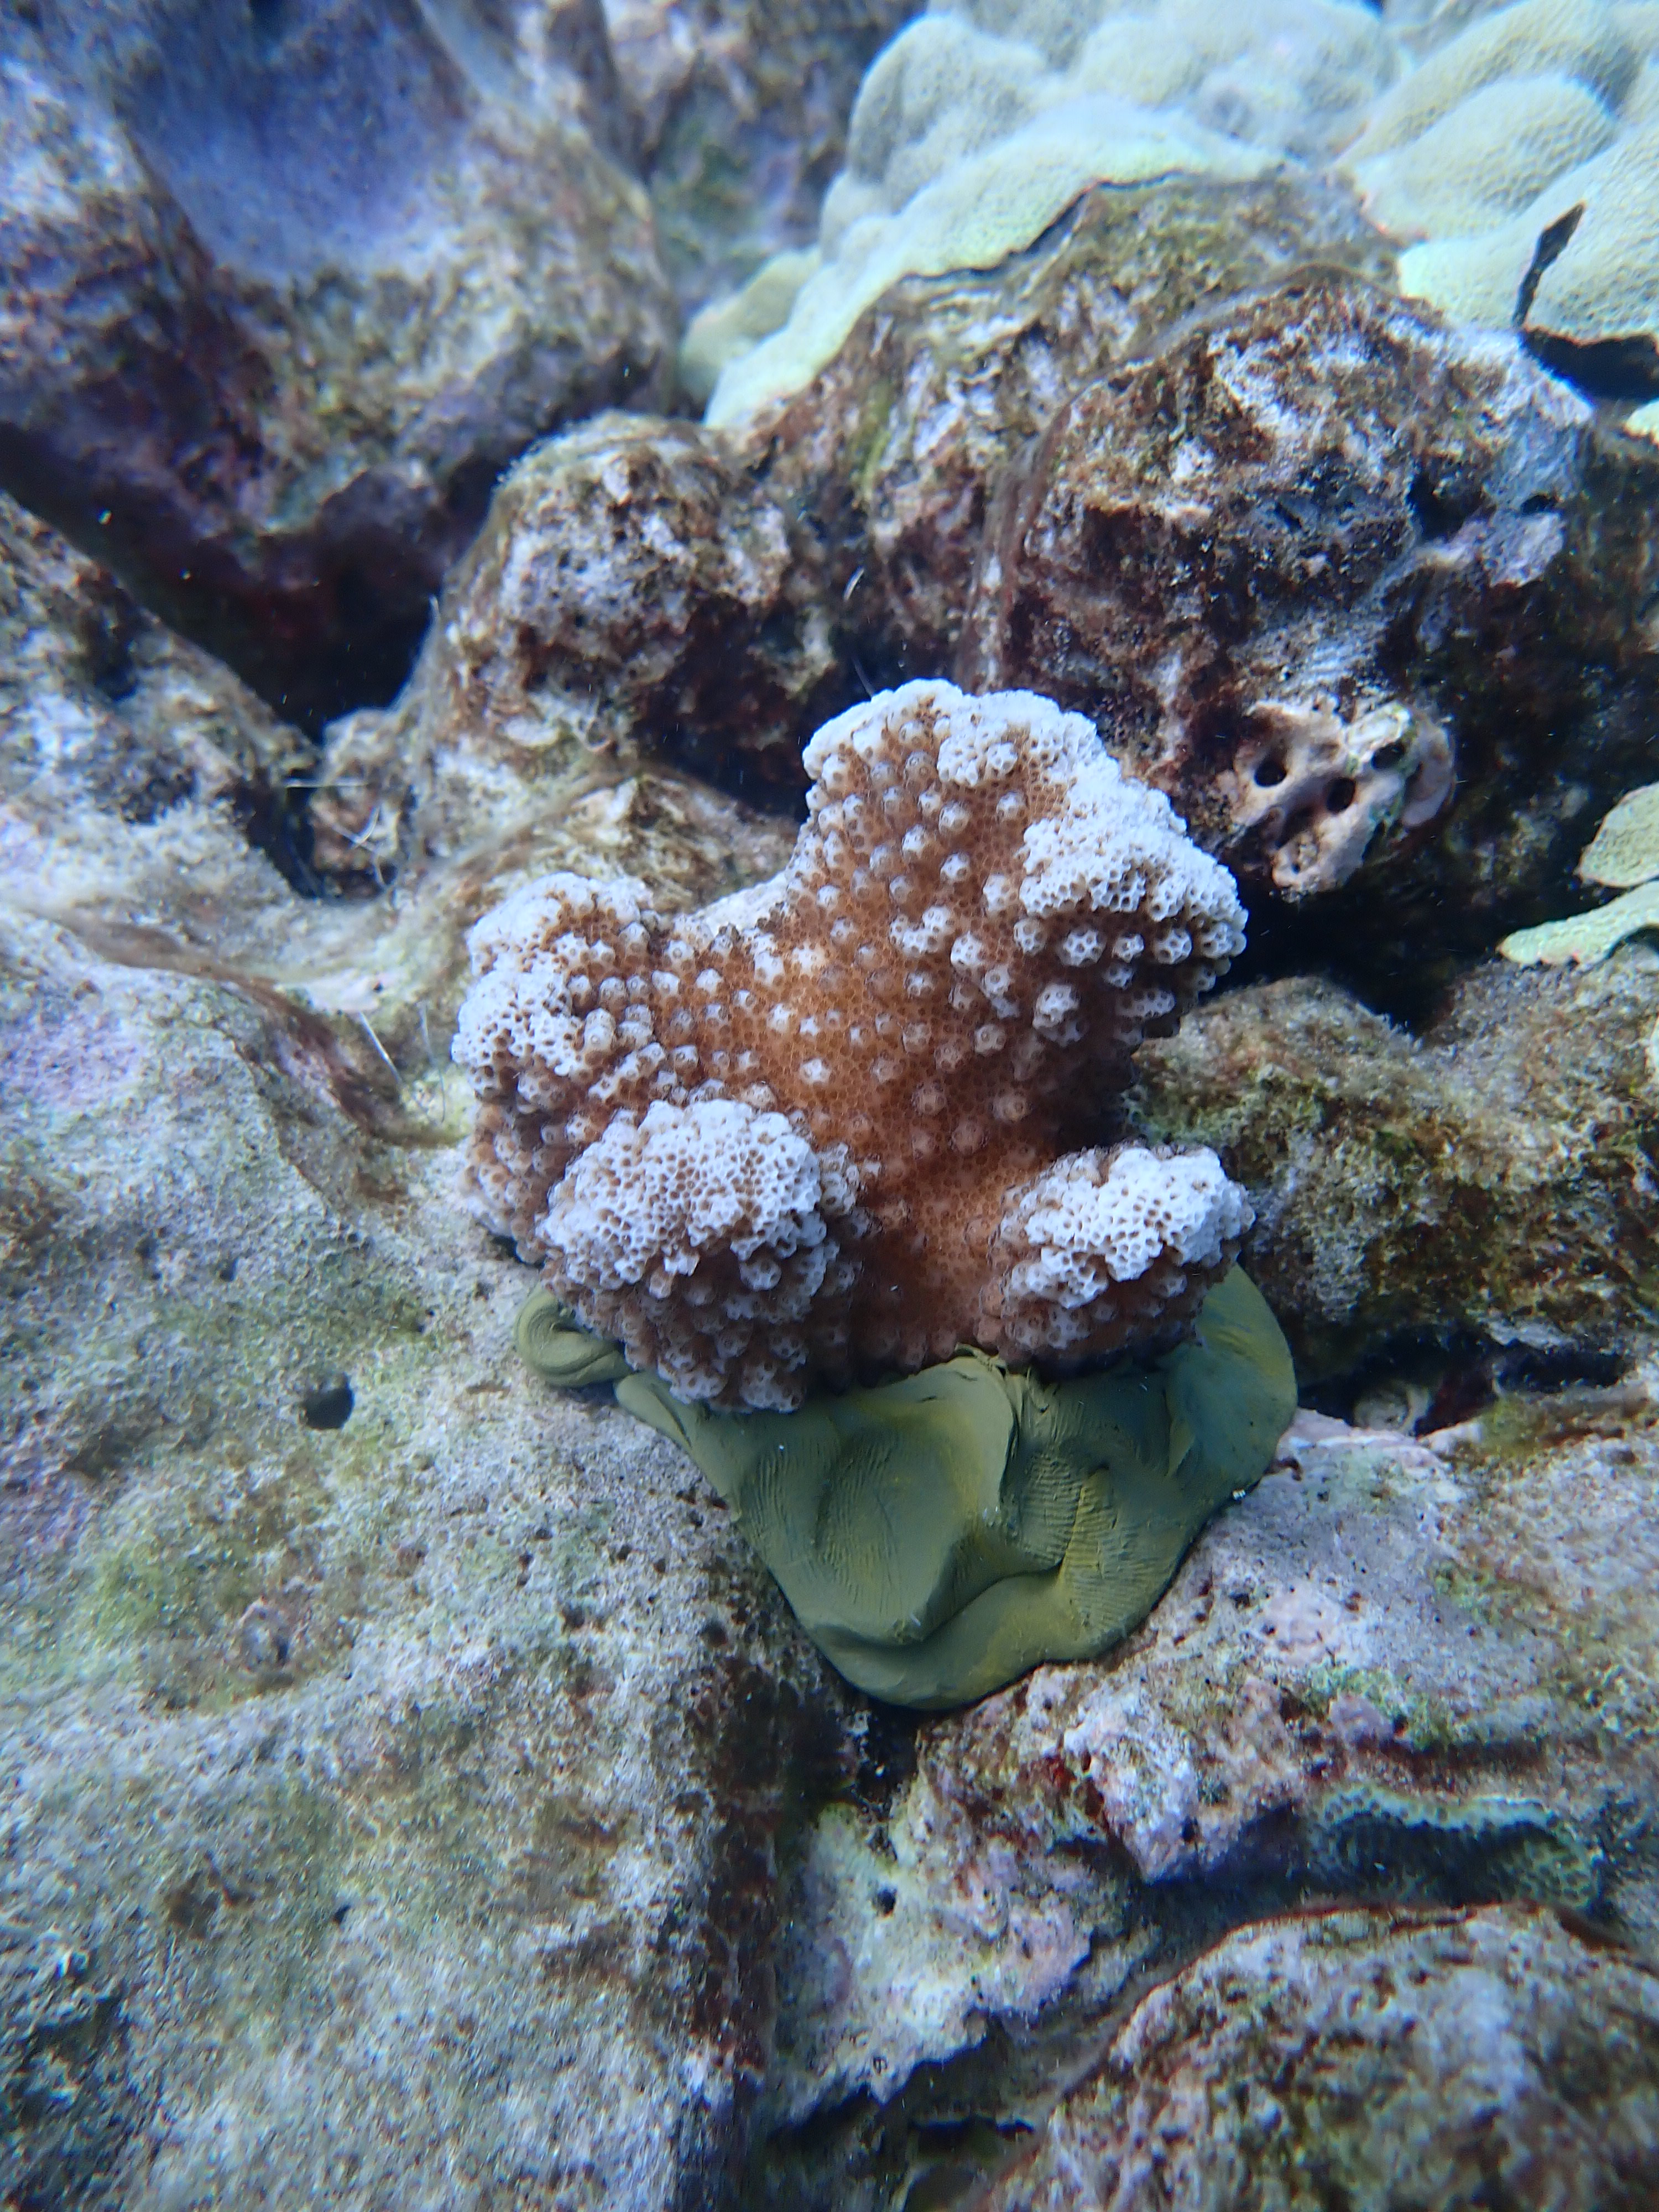 A broken piece of brown and white coral reattached to the reef with green epoxy.